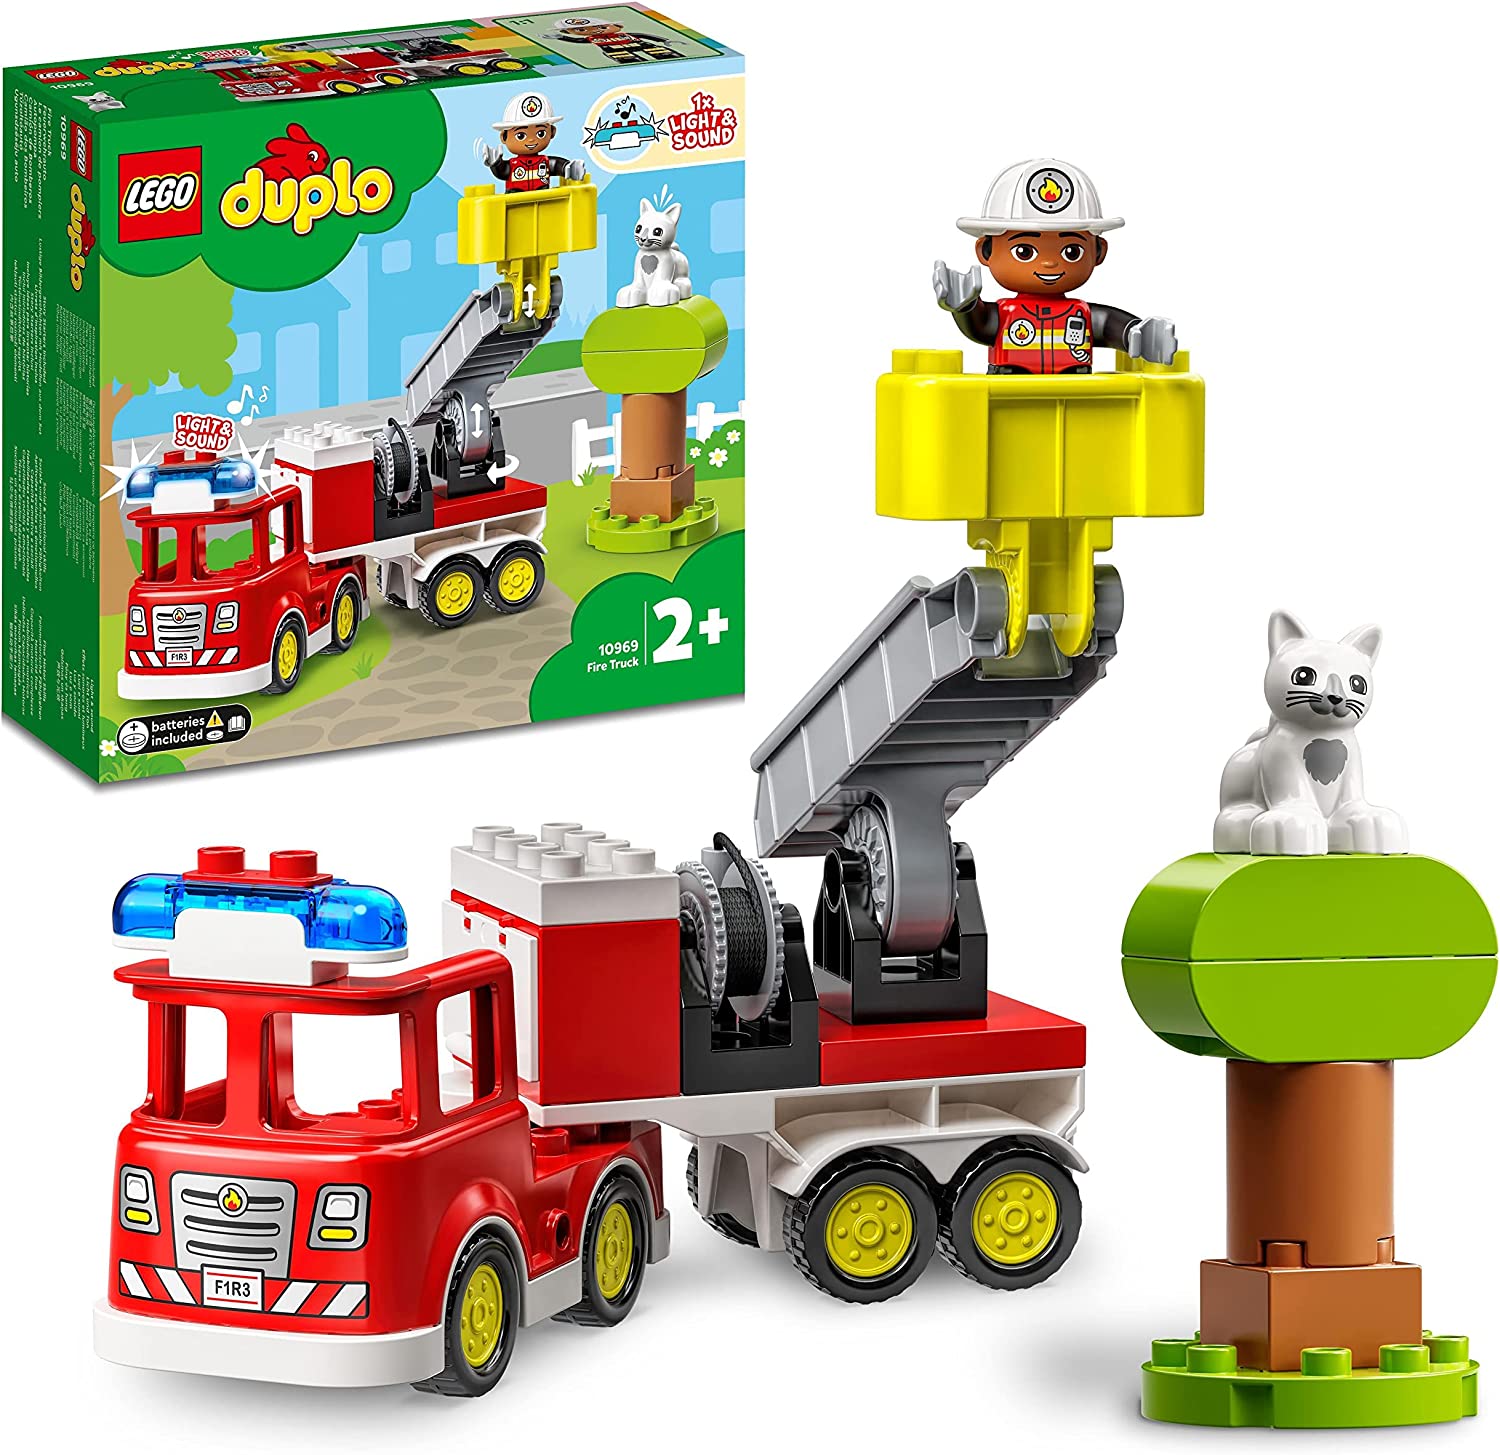 LEGO 10969 Duplo Town Fire Engine Toy, Set with Blue Light and Martinhorn, Fireman and Cat, Educational Toy for Toddlers from 2 Years